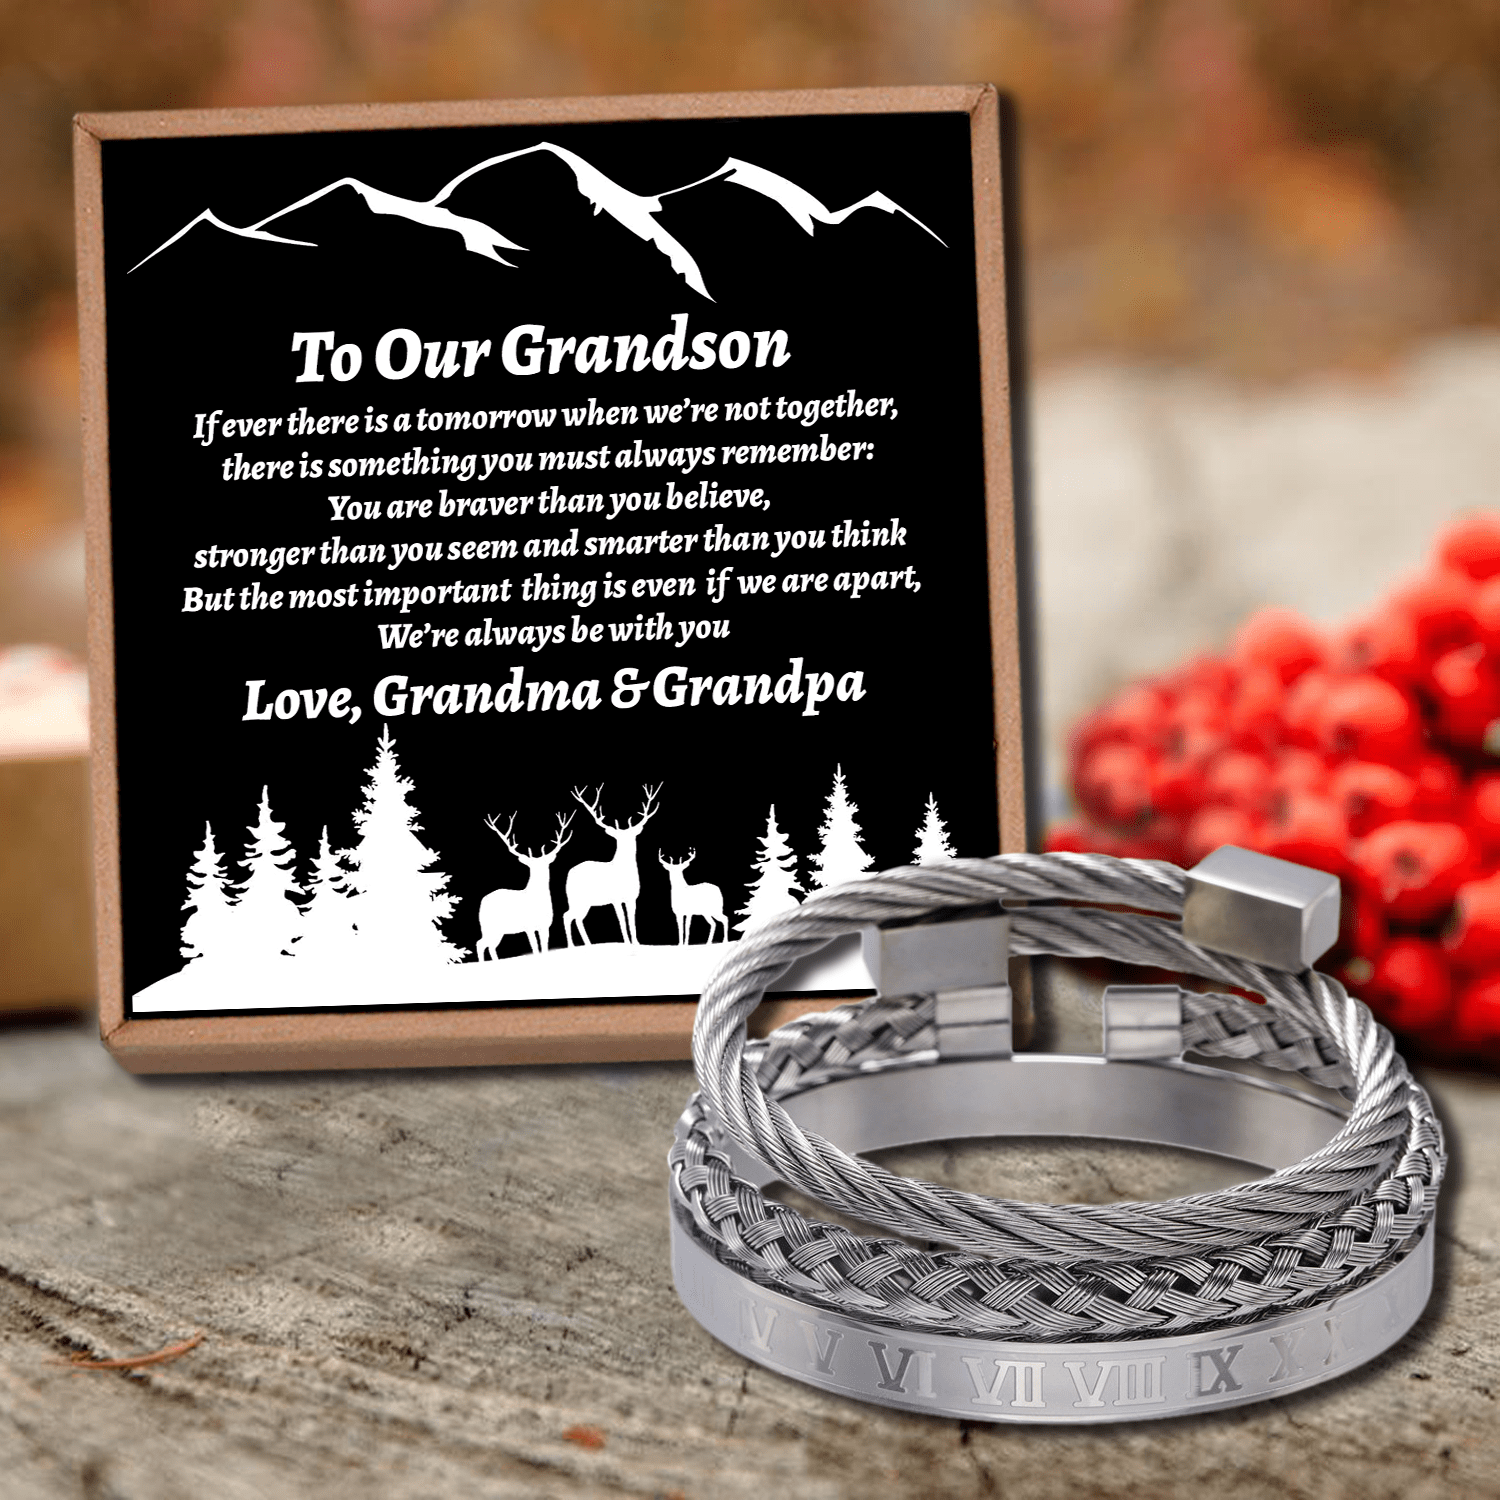 Bracelets To Our Grandson - We Are Always Be With You Roman Numeral Bracelet Set Silver GiveMe-Gifts